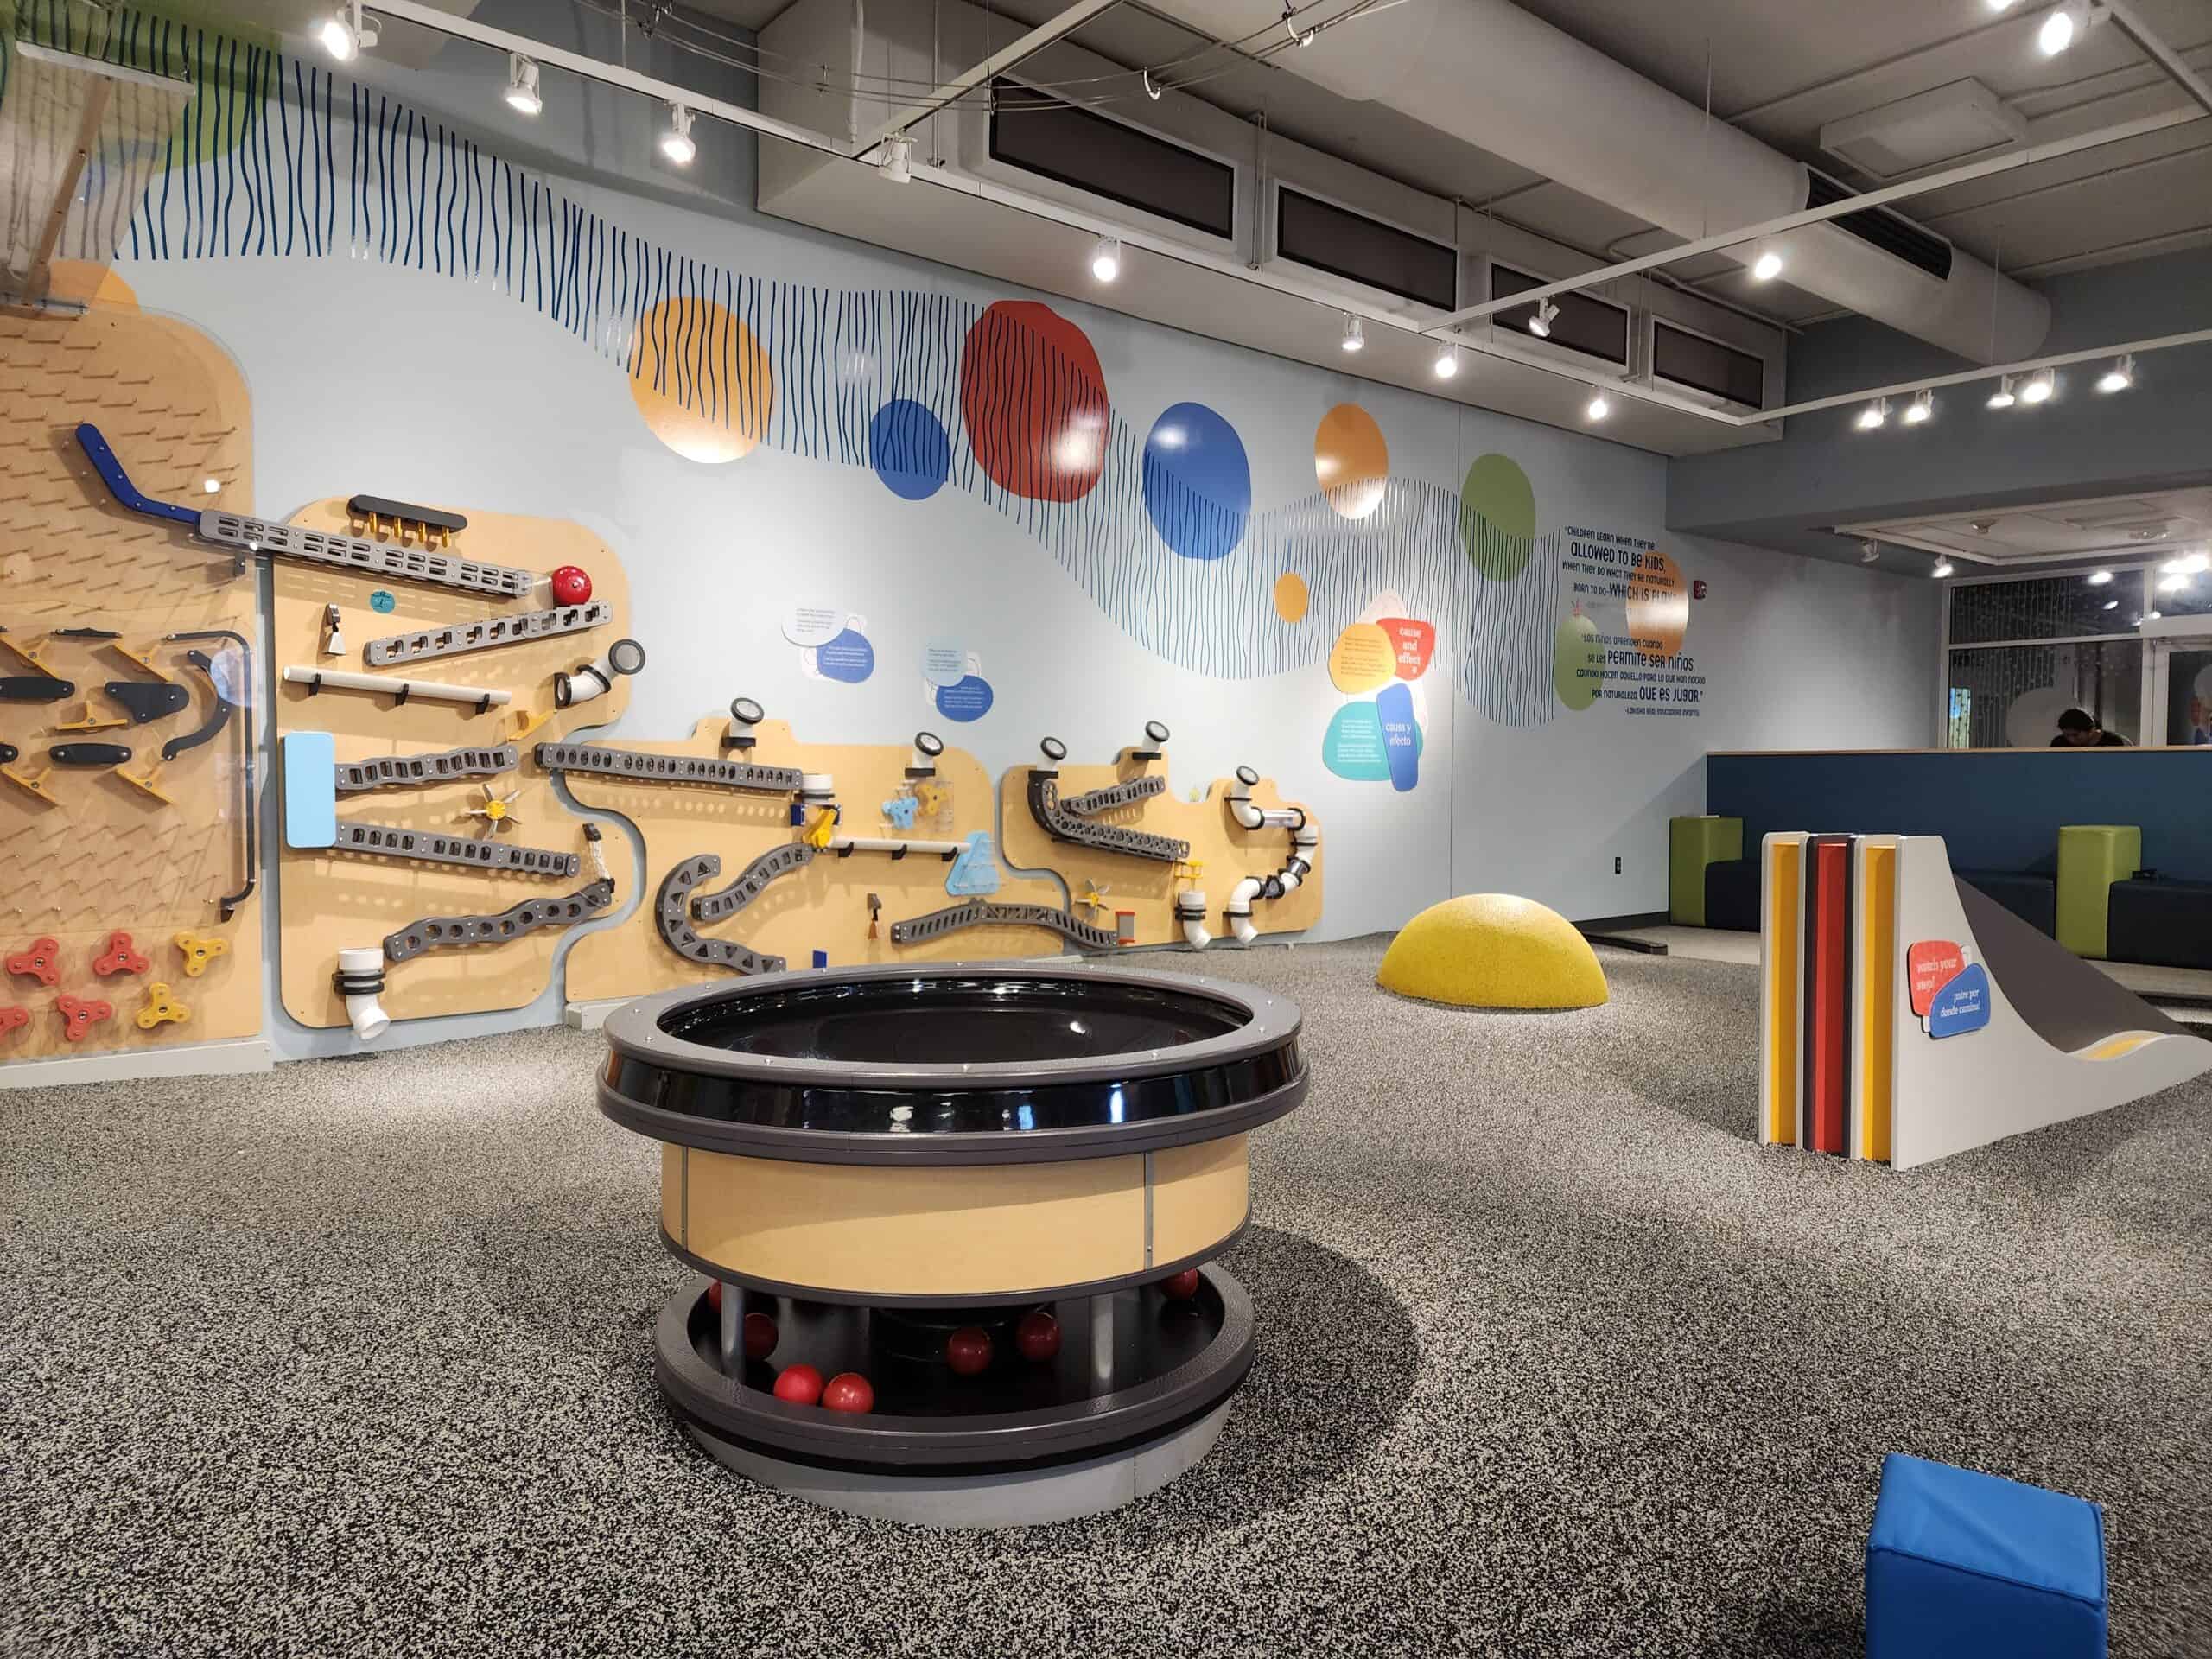 An interactive children's museum exhibit features an intricate wall-mounted ball track and engaging floor activities, stimulating learning and play with a blend of kinetic elements and colorful designs